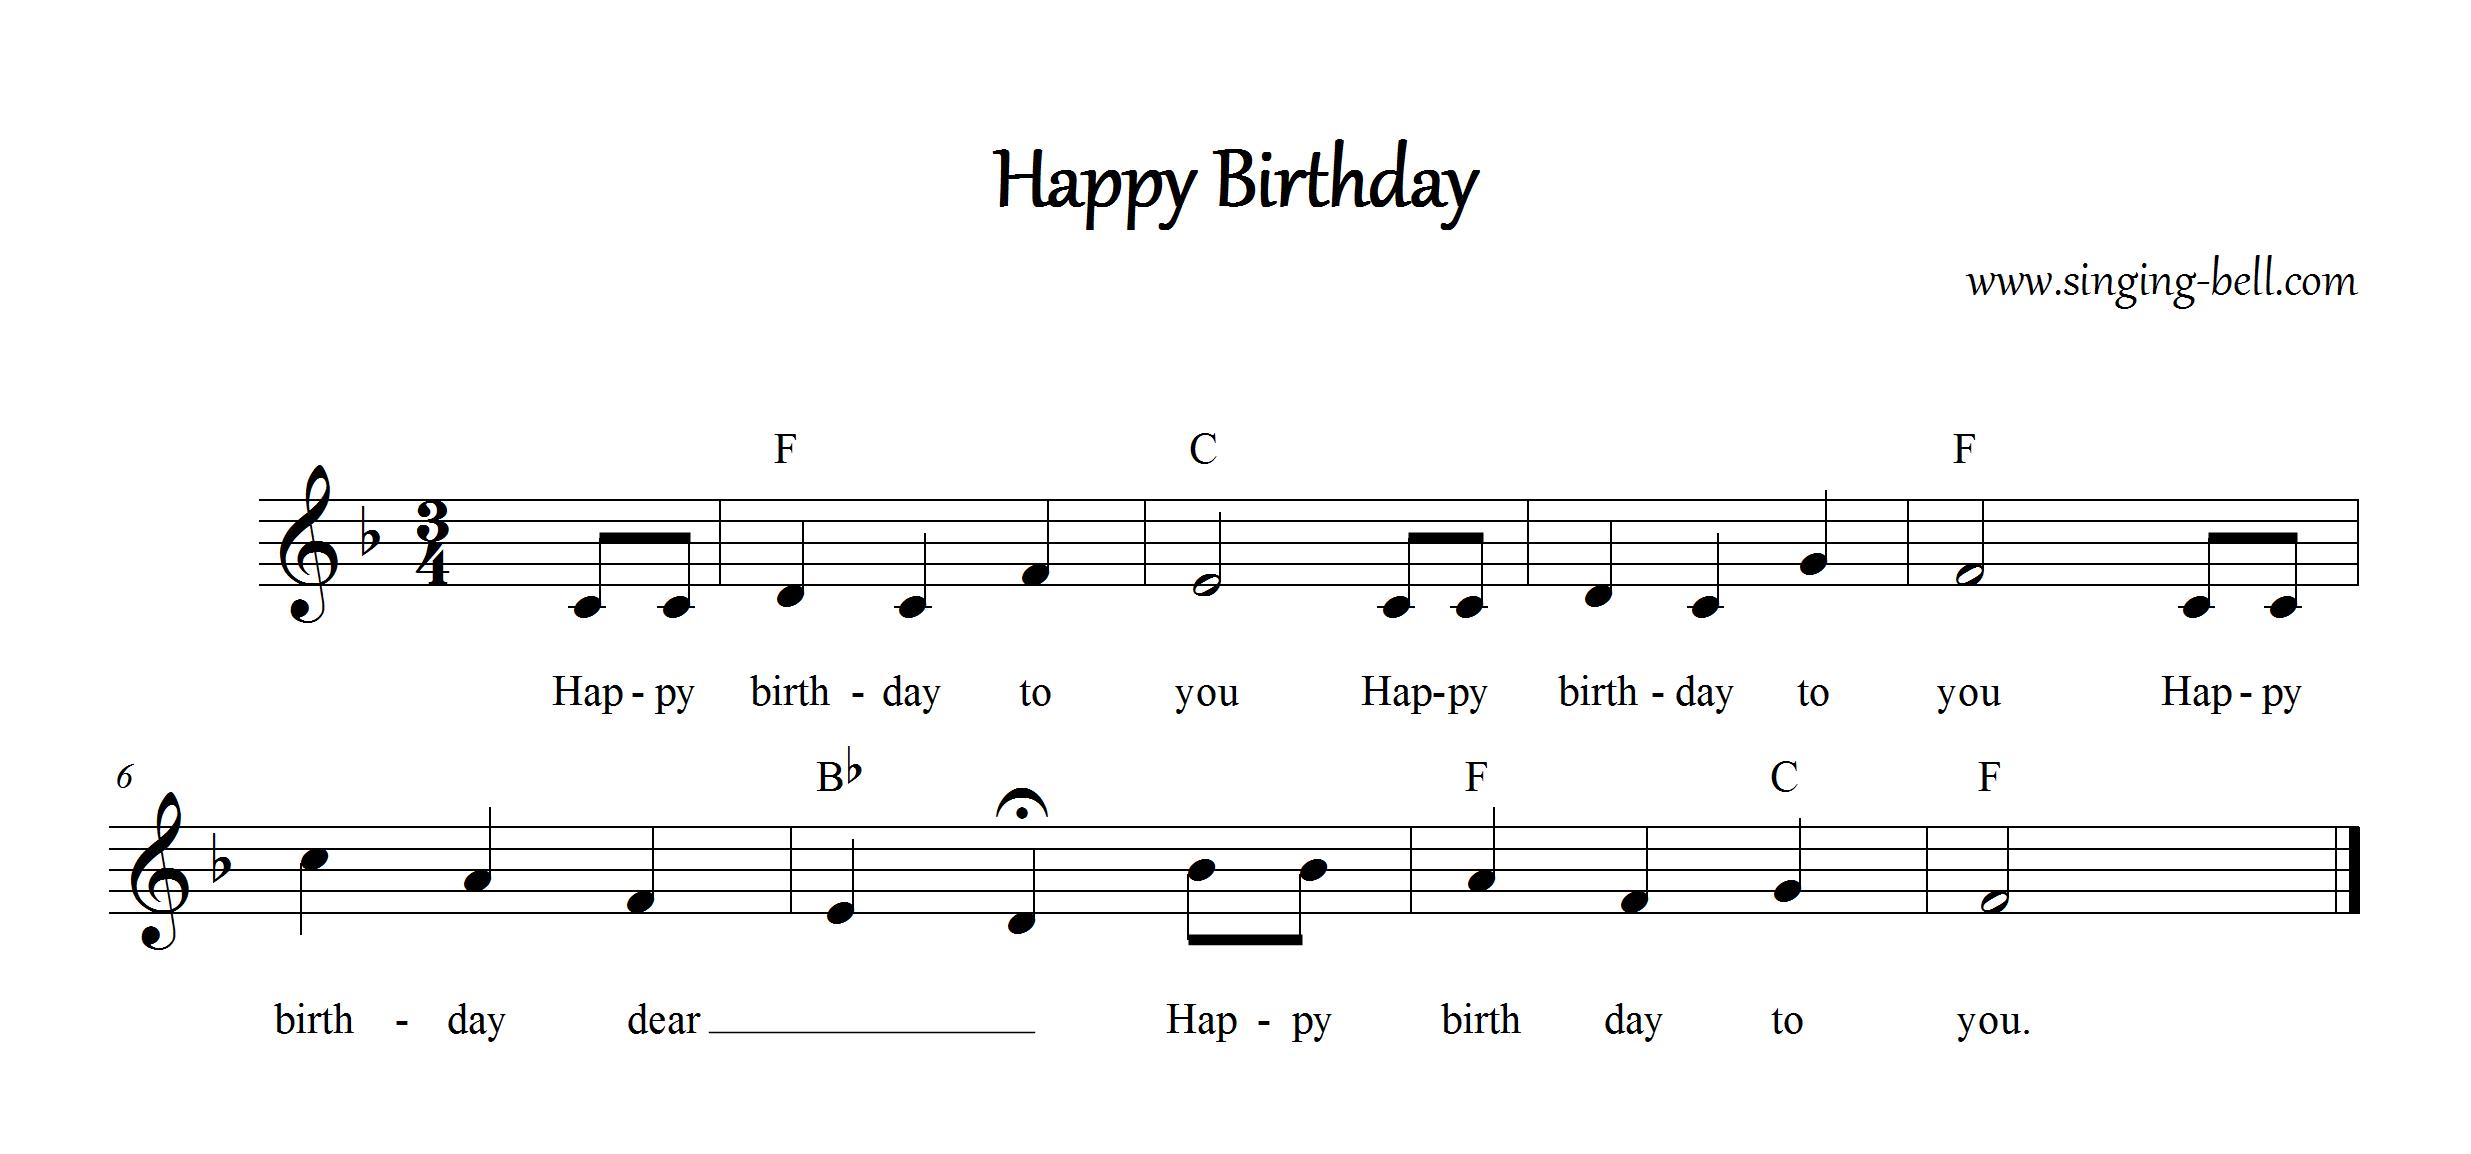 free happy birthday songs download